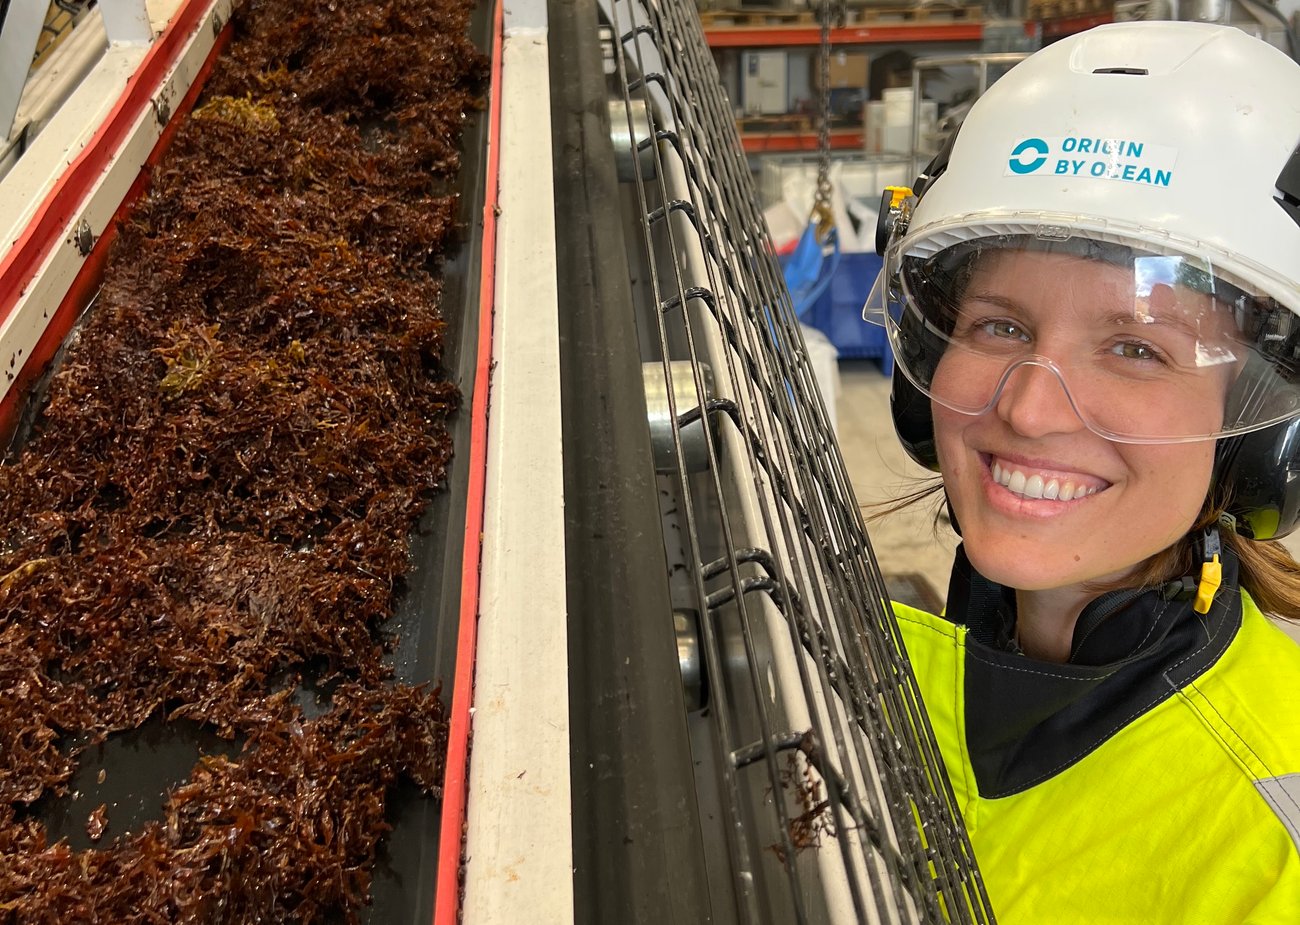 The first step in biorefining seaweed